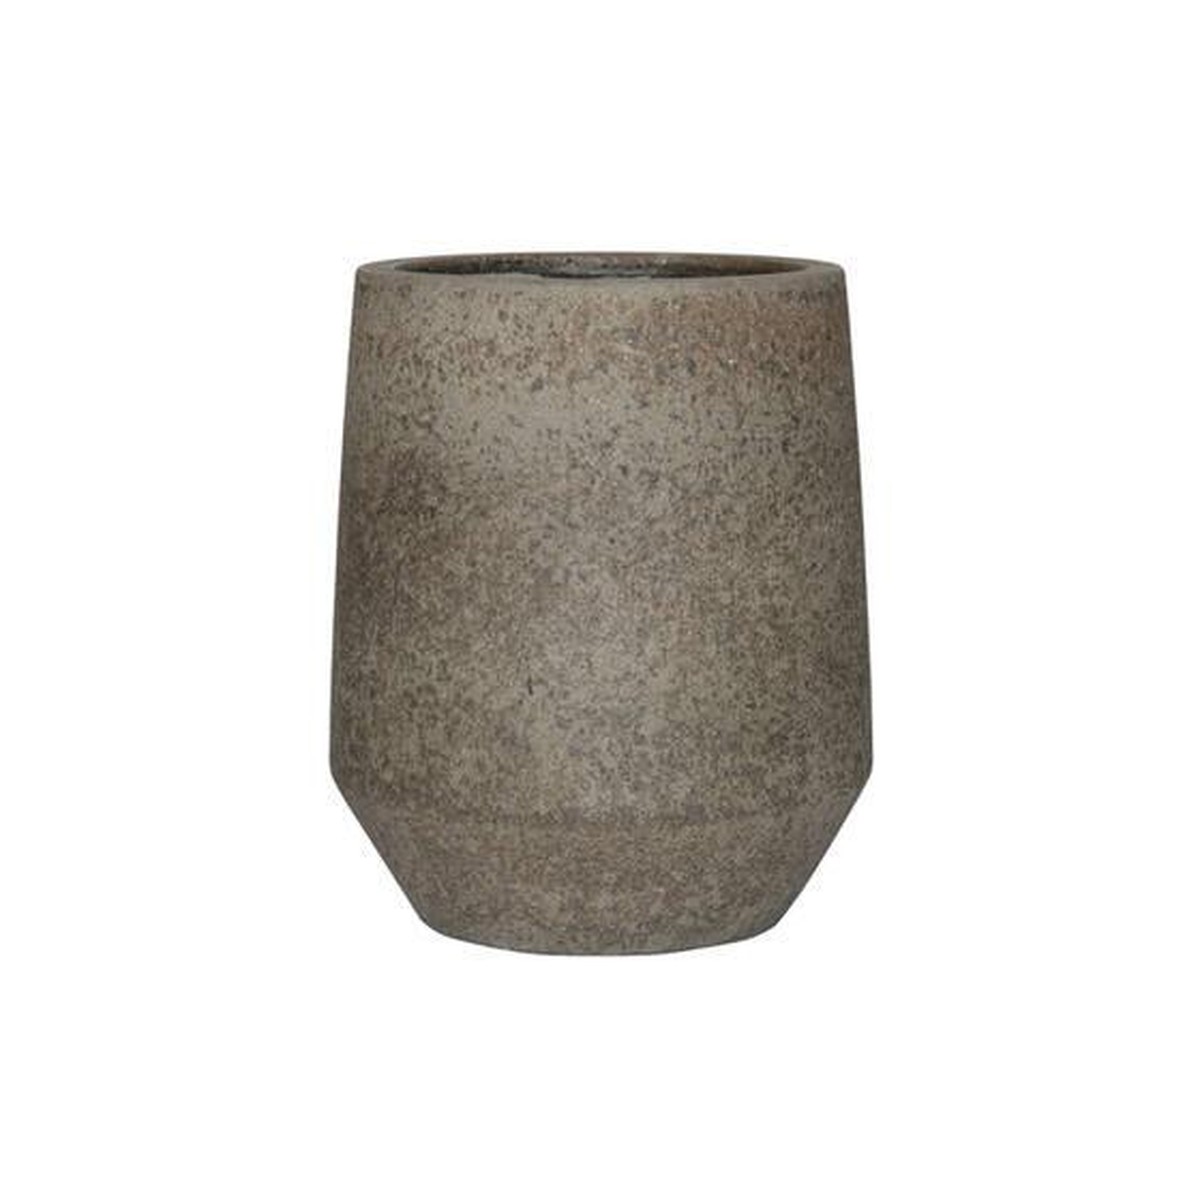 Potterypots Cement and Stone Harith High S, Dioriet Grey Gris plomb 40x48cm 44L